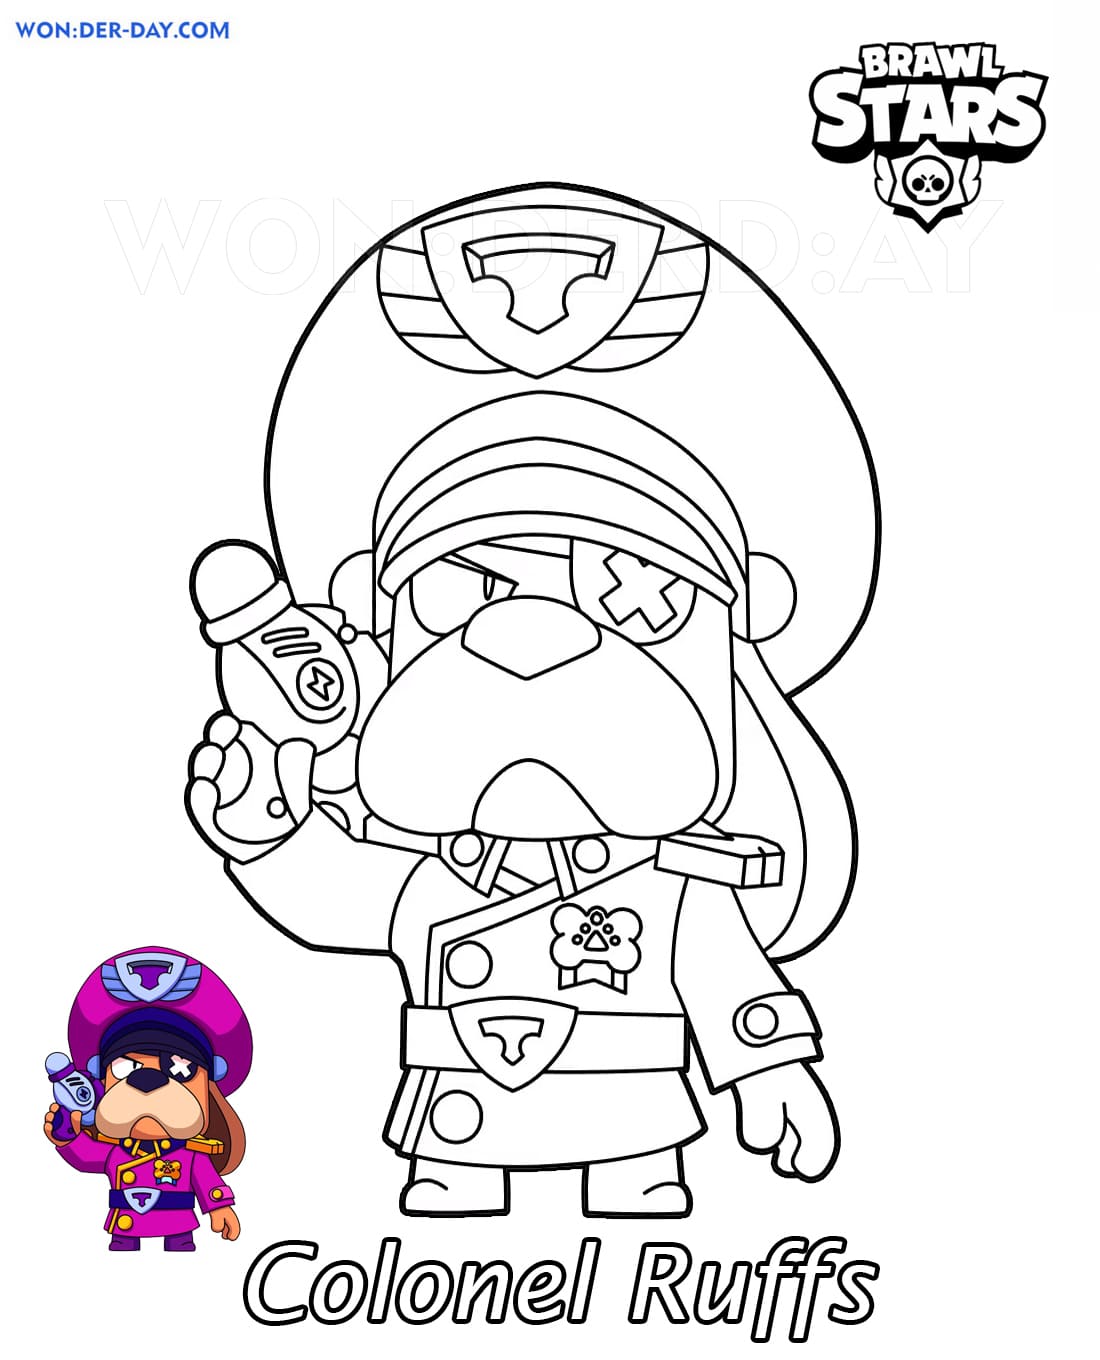 Colonel Ruffs Brawl Stars Coloring Pages 2021 Printable - brawl stars coloring paper